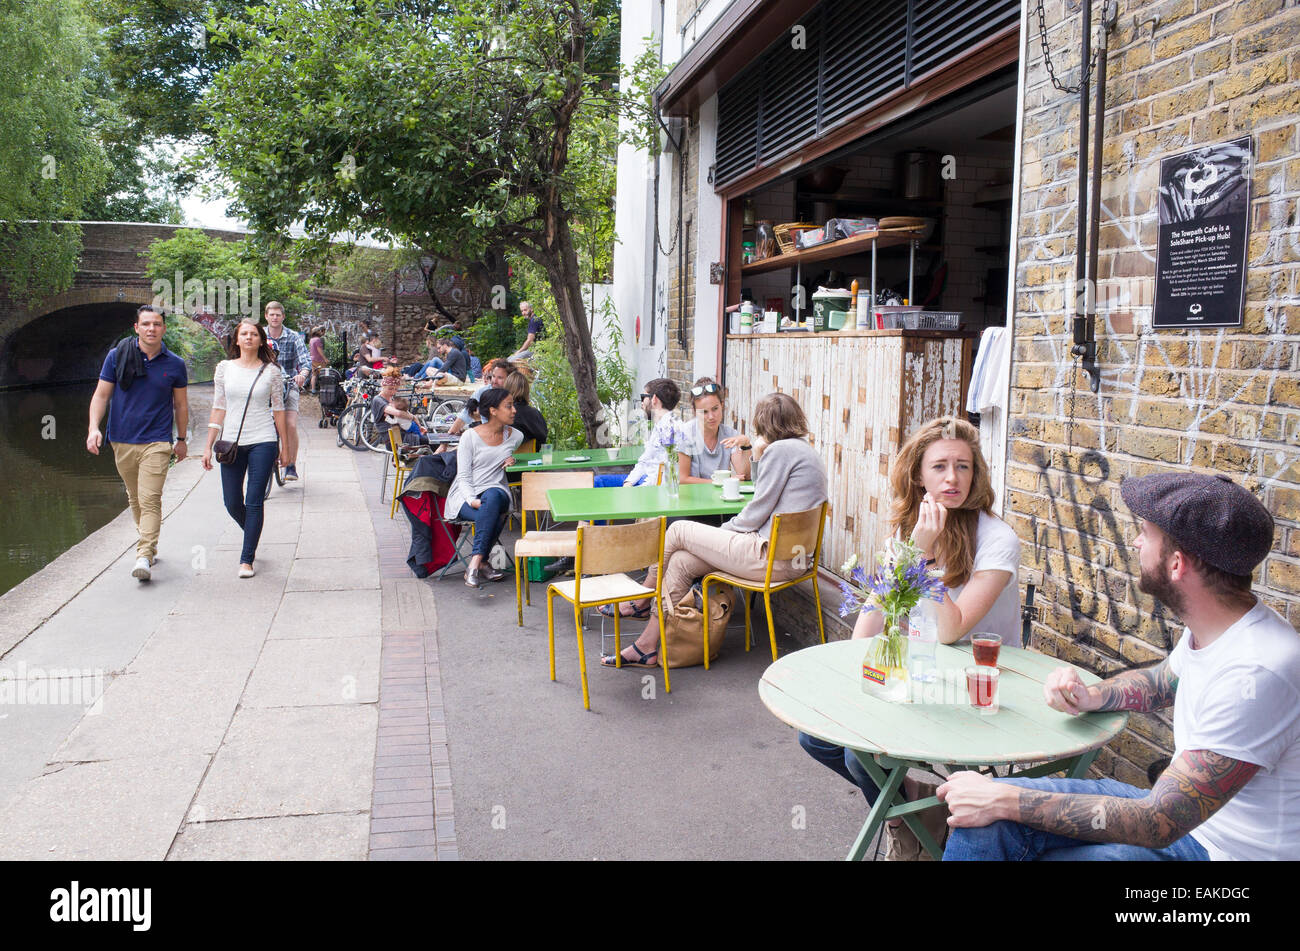 The Towpath Cafe on the Regent's Canal, Shoreditch, Hackney, London, UK Stock Photo